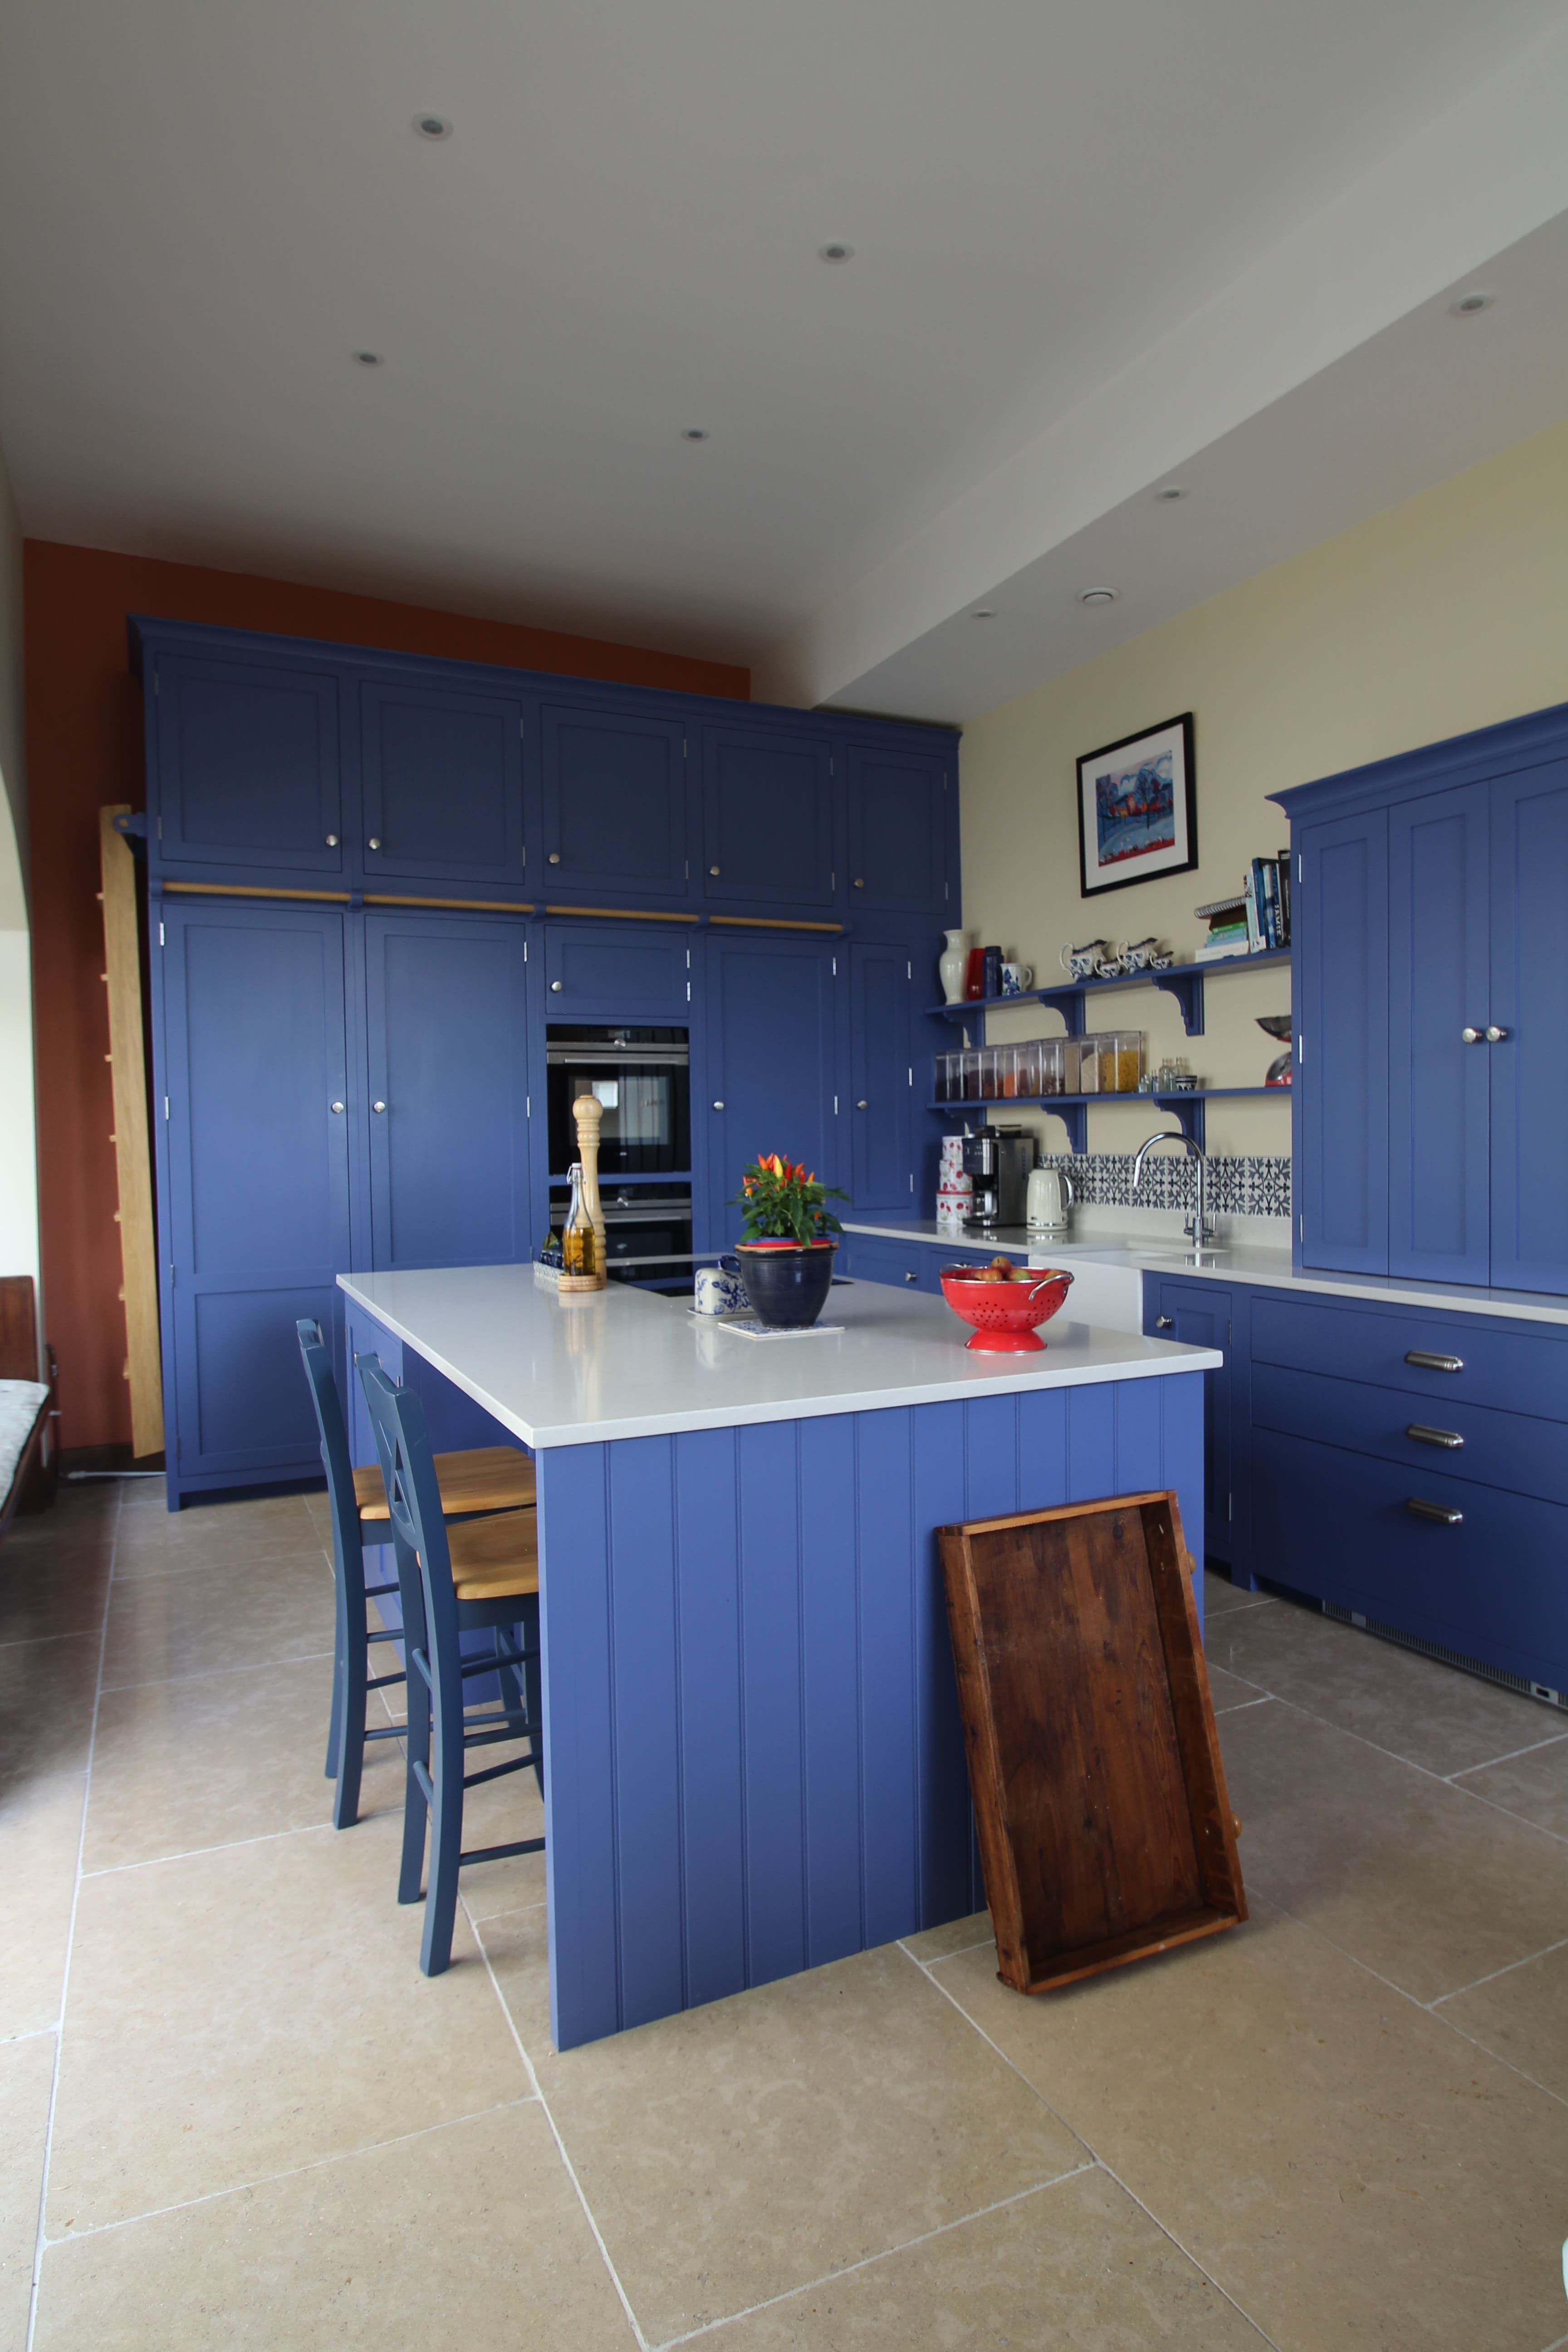 This is a vibrant kitchen with striking blue cabinetry and a matching central island, complemented by white worktops. The island also serves as a breakfast bar with two high blue stools. Natural light floods the space, reflecting off the light stone-tiled floor. 